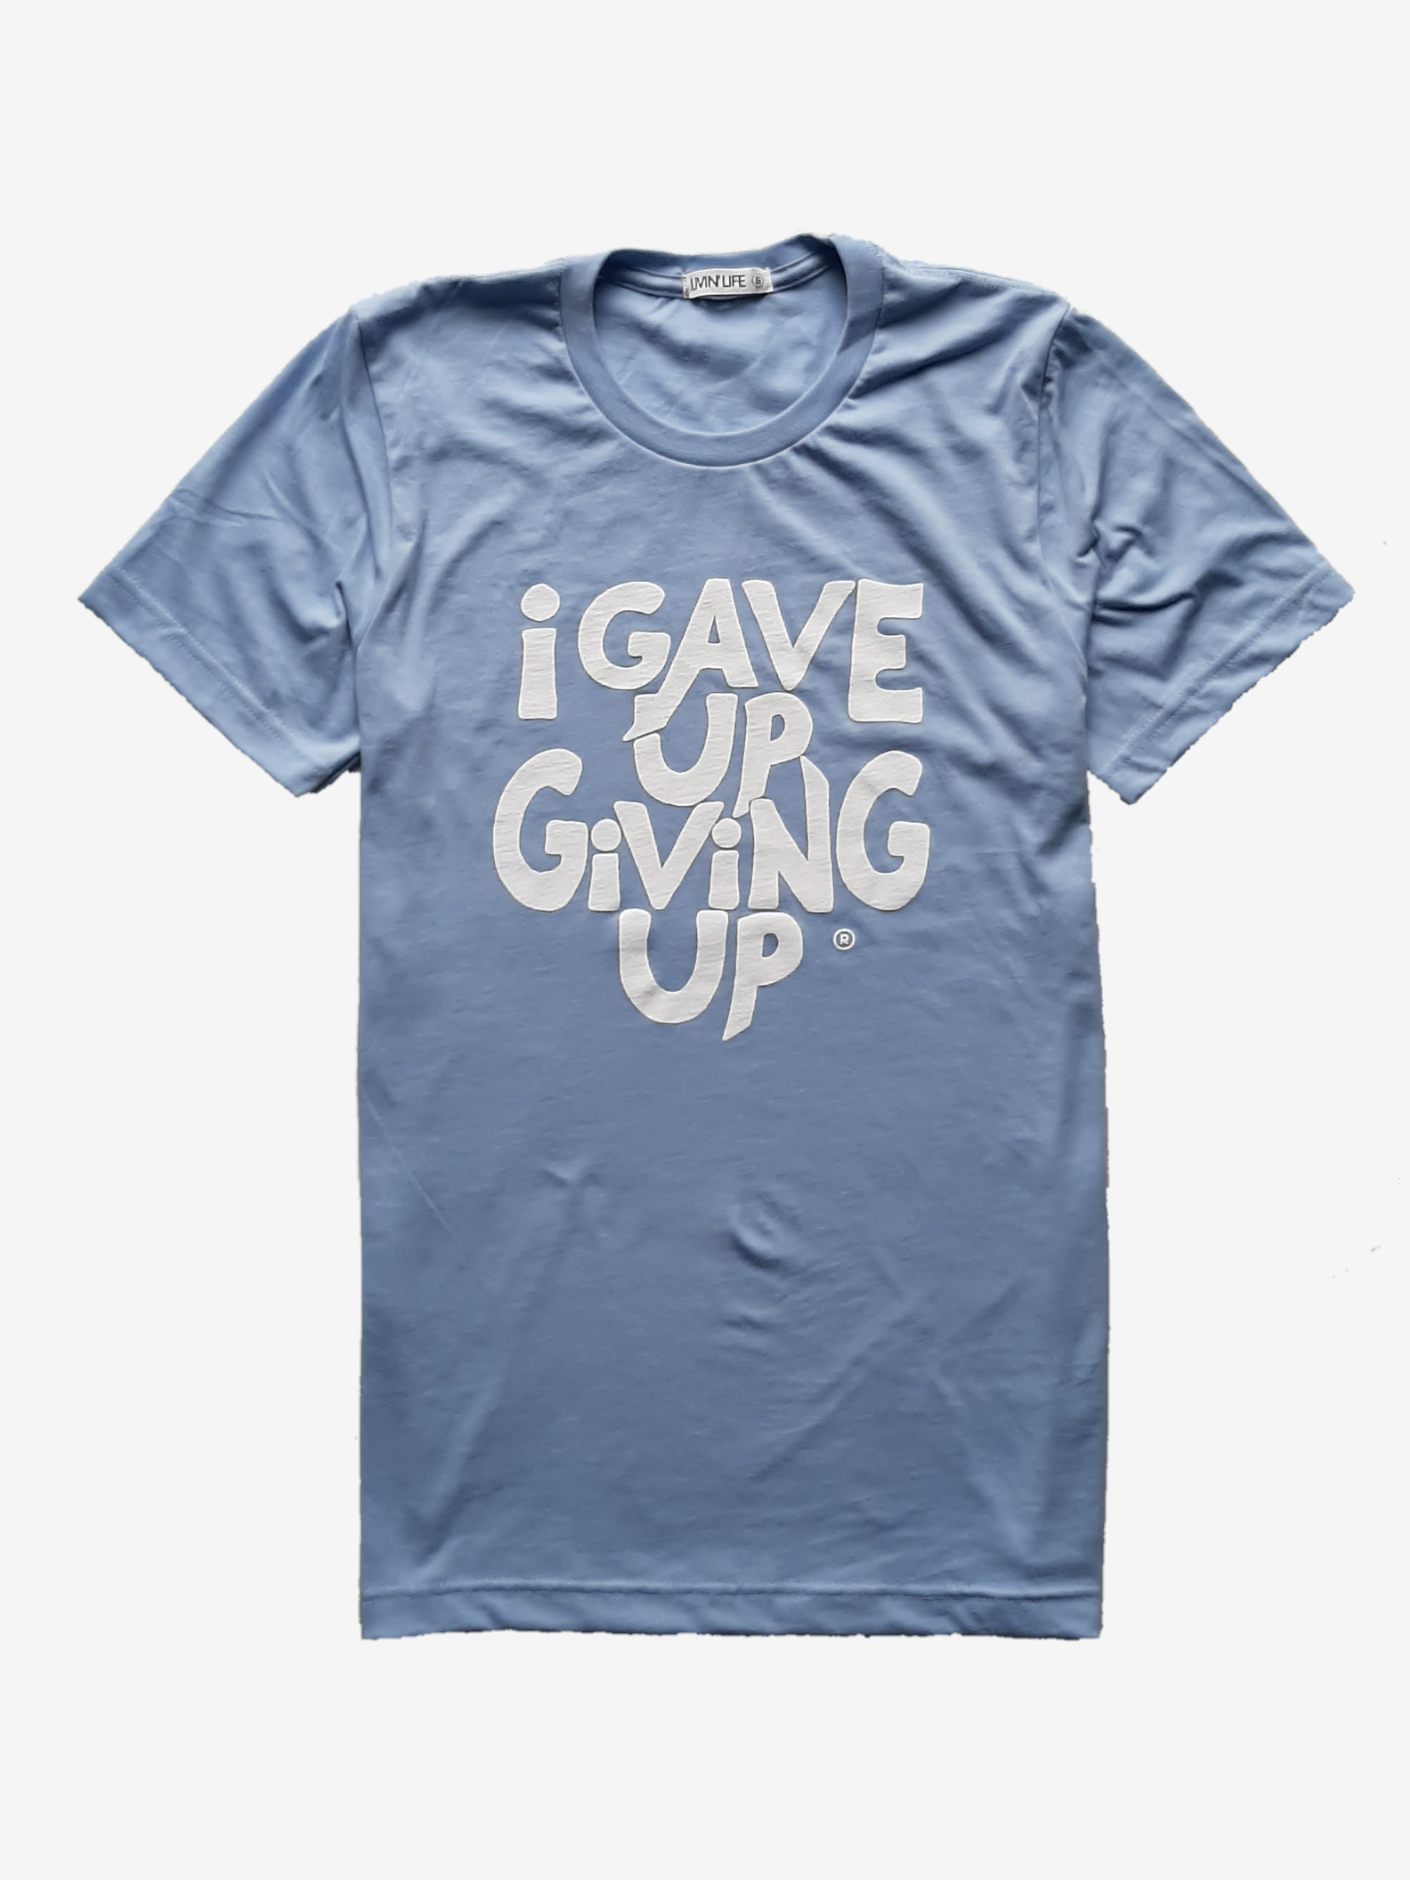 I Gave Up Giving Up Tee Tshirt